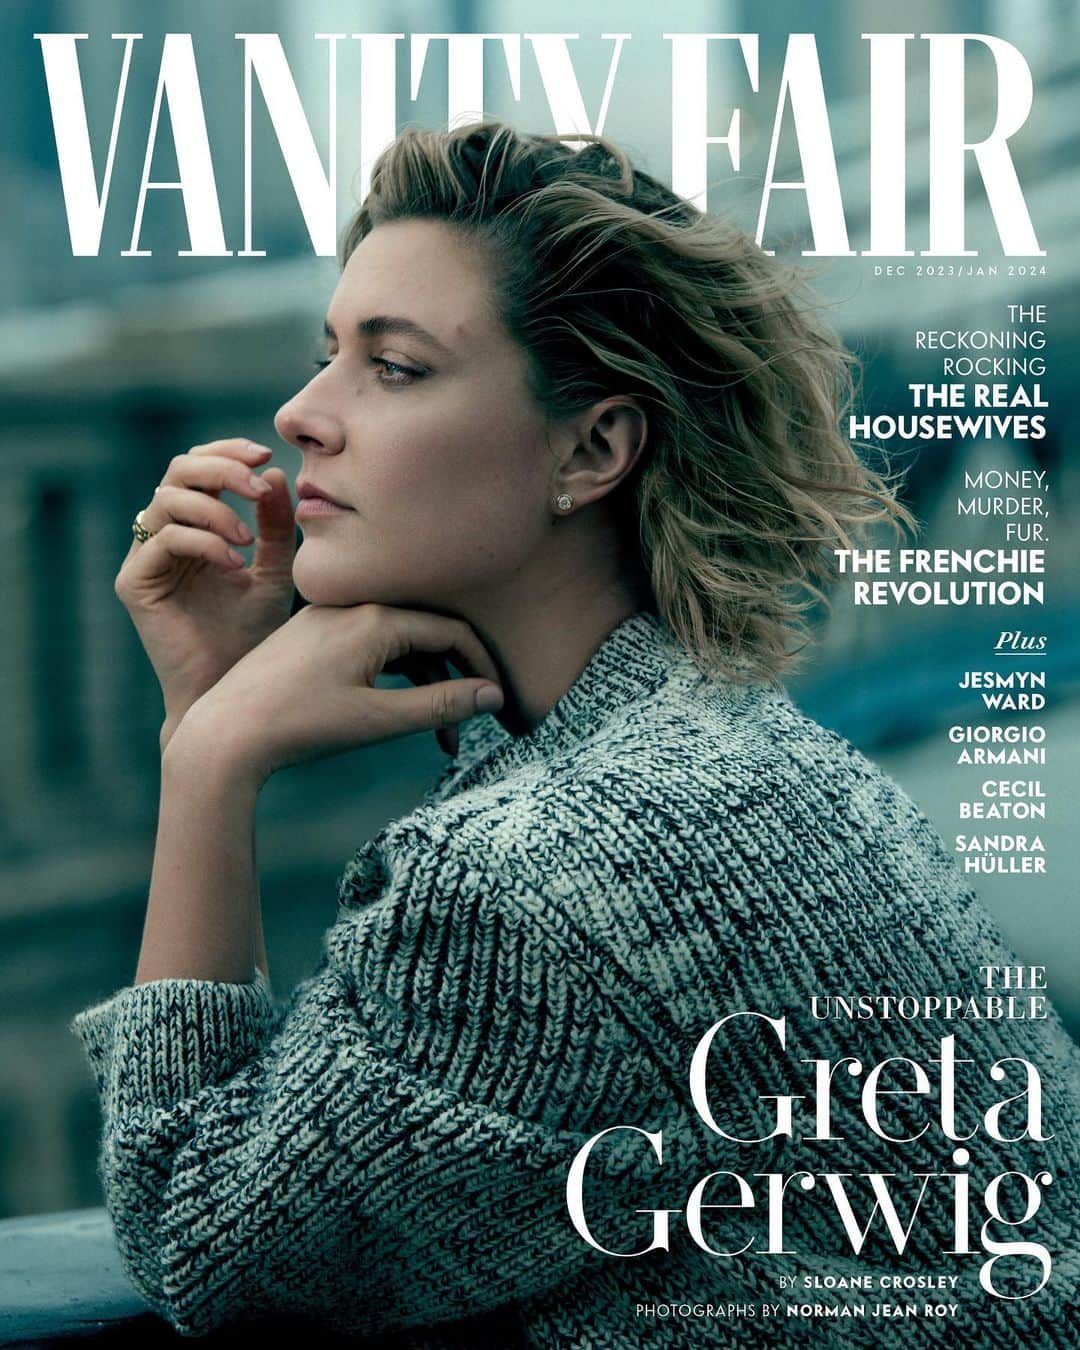 Vanity Fairのインスタグラム：「With #Barbie, Greta Gerwig injected fun back into Hollywood, and $1.4 billion into the box office—and she already had three Oscar nominations under her palazzo belt. If she has her way, she’ll be doing the same thing for the next 40 years.  Gerwig has had one of the most quantifiably successful years of any artist on the planet, creating a paradigm shift that brought people back to theaters just as pop icons brought them back to stadiums, writes @sloane_crosley. Getting her to acknowledge this, however, is like asking Ken to put his shirt on. “Everything I know about the movie’s success is an anecdote,” she tells VF.   In her first extended profile since the ‘Barbie’ bonanza, the director reflects on the historic success of the film, the longevity of her career, and working with the man who is also her life partner.   Photographer @normanjeanroy Wardrobe Stylist @NatashaRoyt Tailor @mariadelgreco Hair Stylist @bobrecine Makeup Artist @romyglow Manicurist @redhotnails Set Designer  @vikirutsch Producer @Boomproductions」